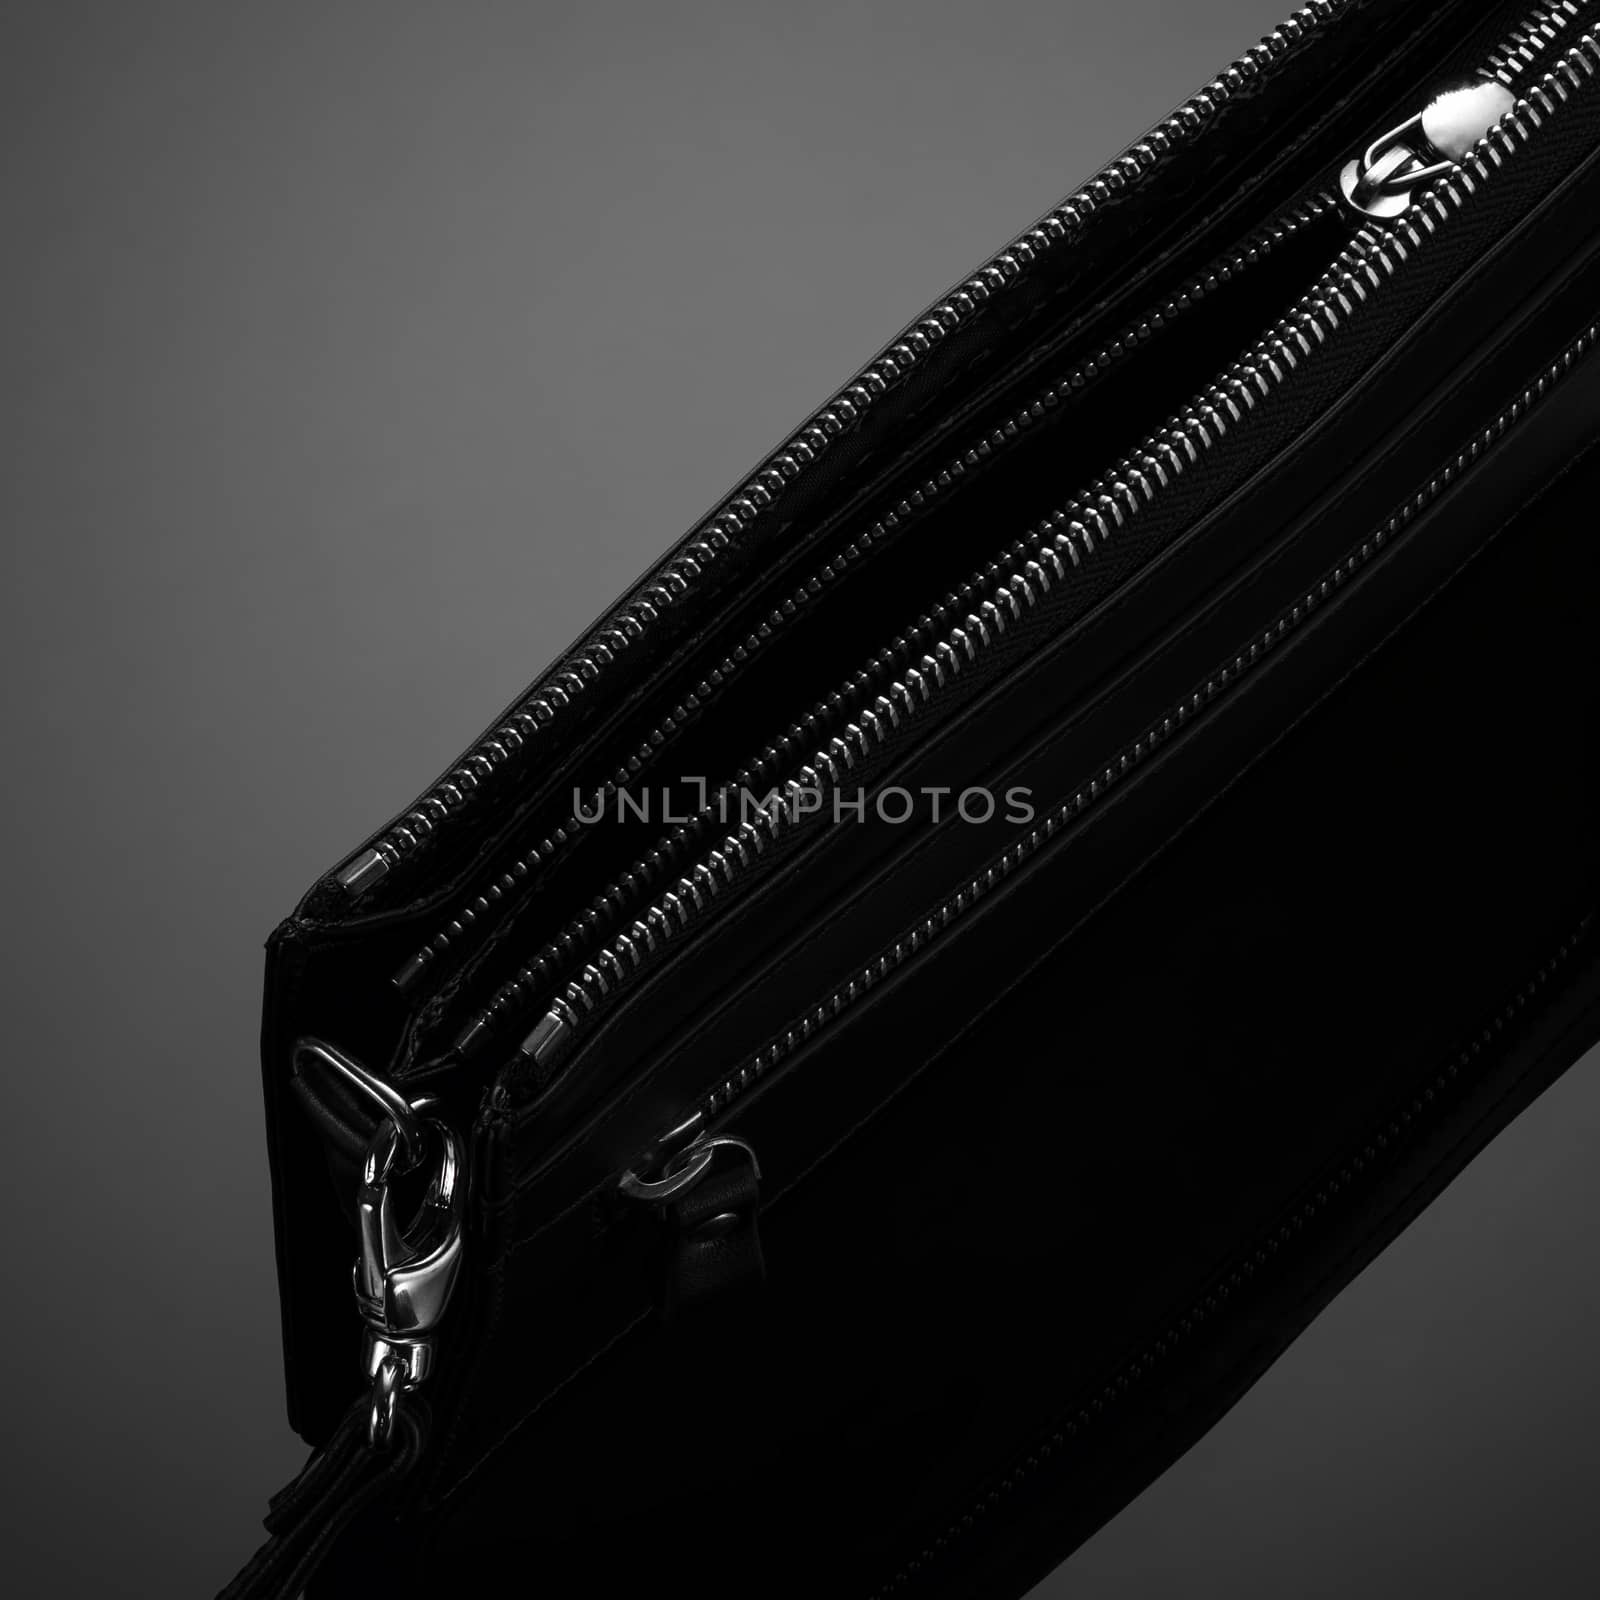 Fashionable leather men's wallet on a dark background